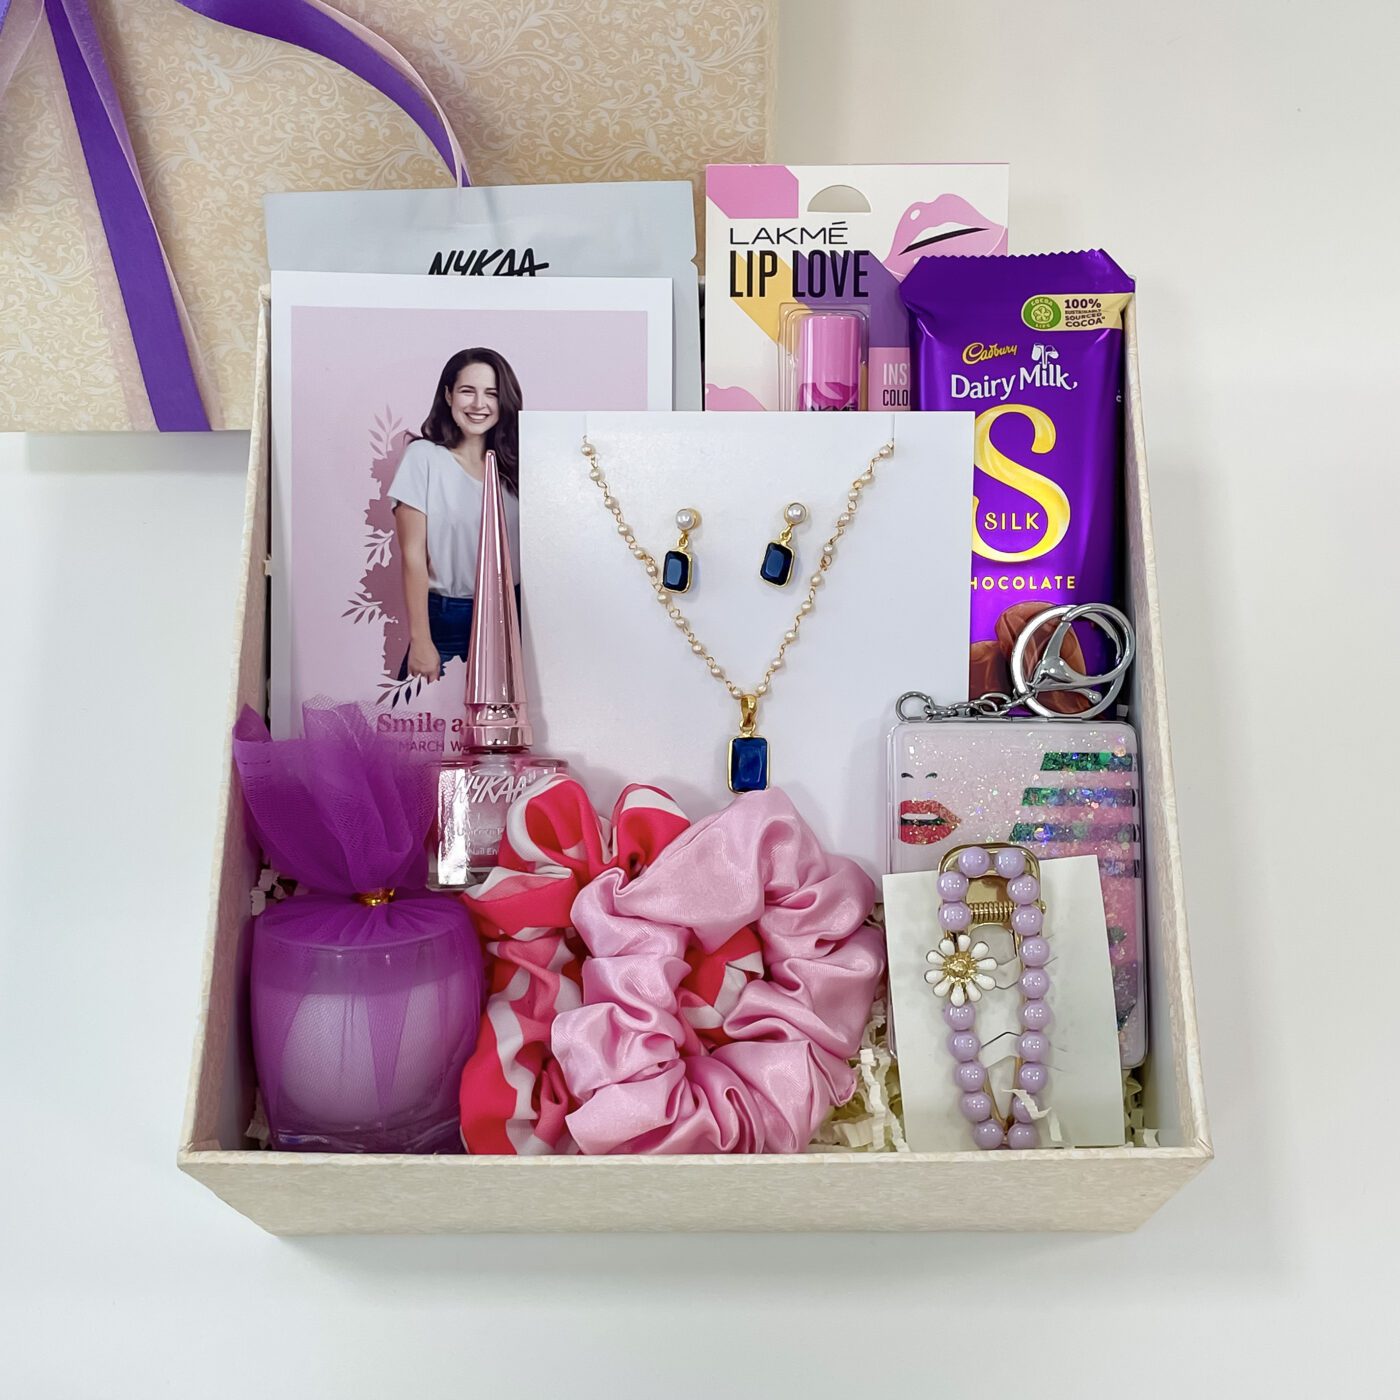 Women's Day Gift Online | Womens Day Gifts in Malaysia - FNP MY-sonthuy.vn